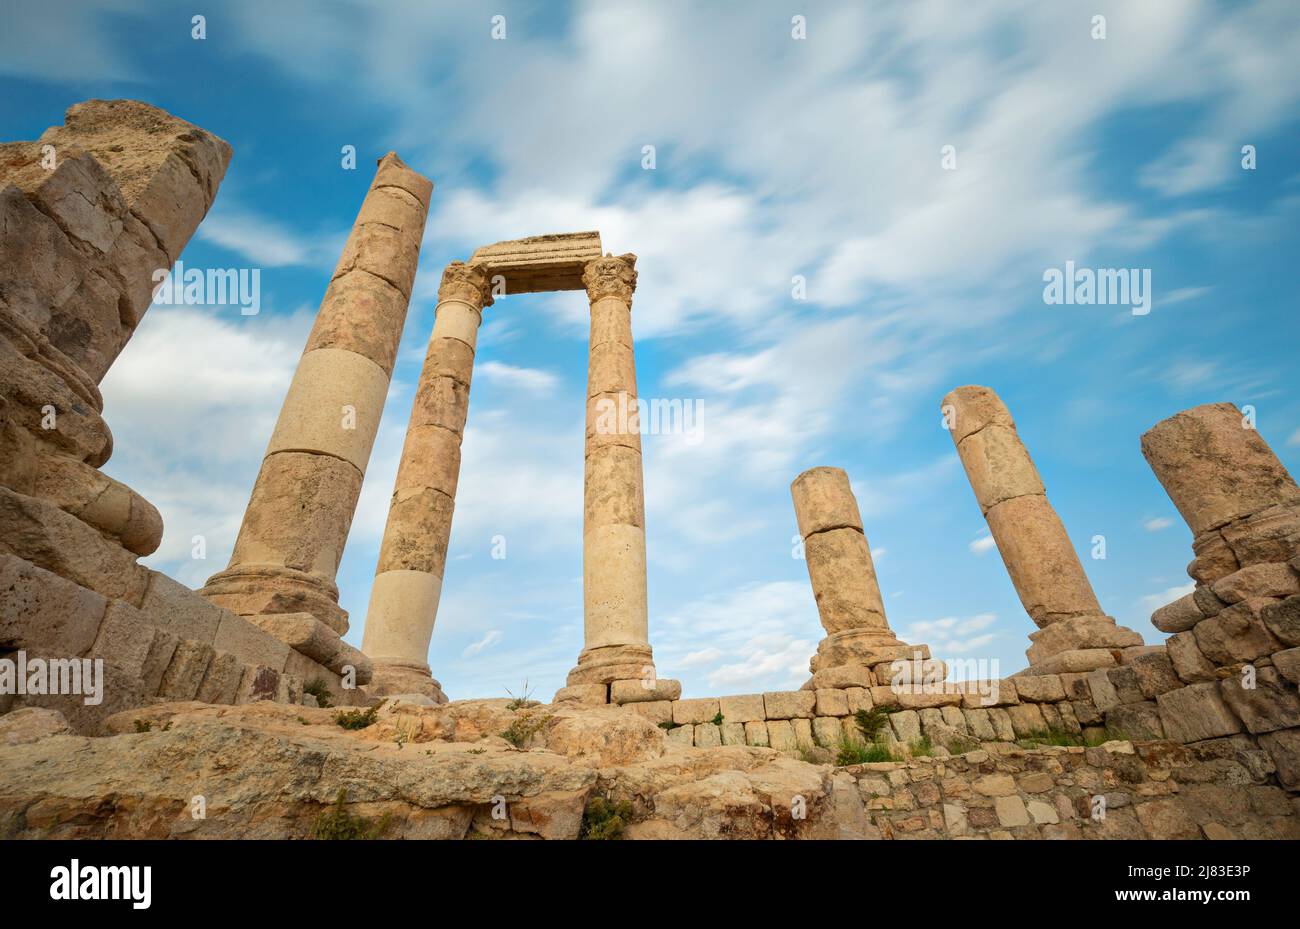 unsurpassed view of the ruins of the temple of Hercules on the top of the mountain of the Amman citadel against the background of a blue sky with clou Stock Photo